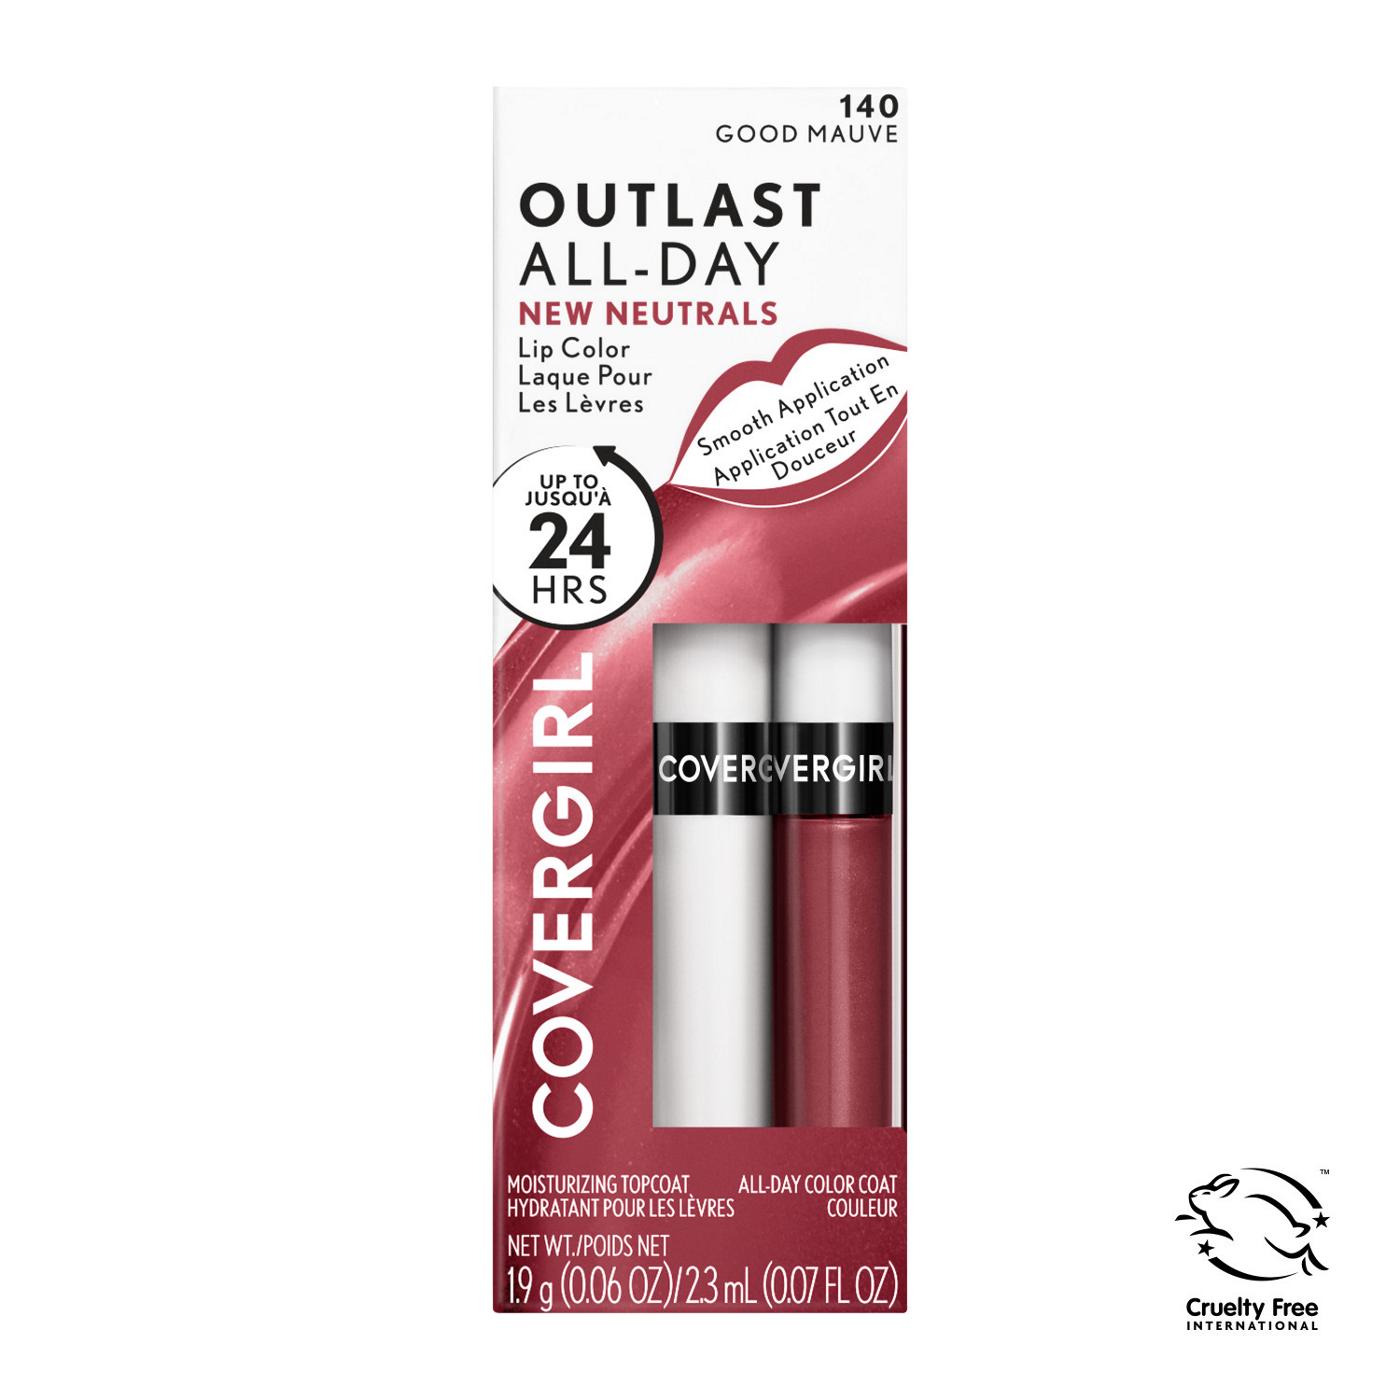 Covergirl Outlast All-Day Lipcolor New Neutrals 140 Good Mauve; image 1 of 6